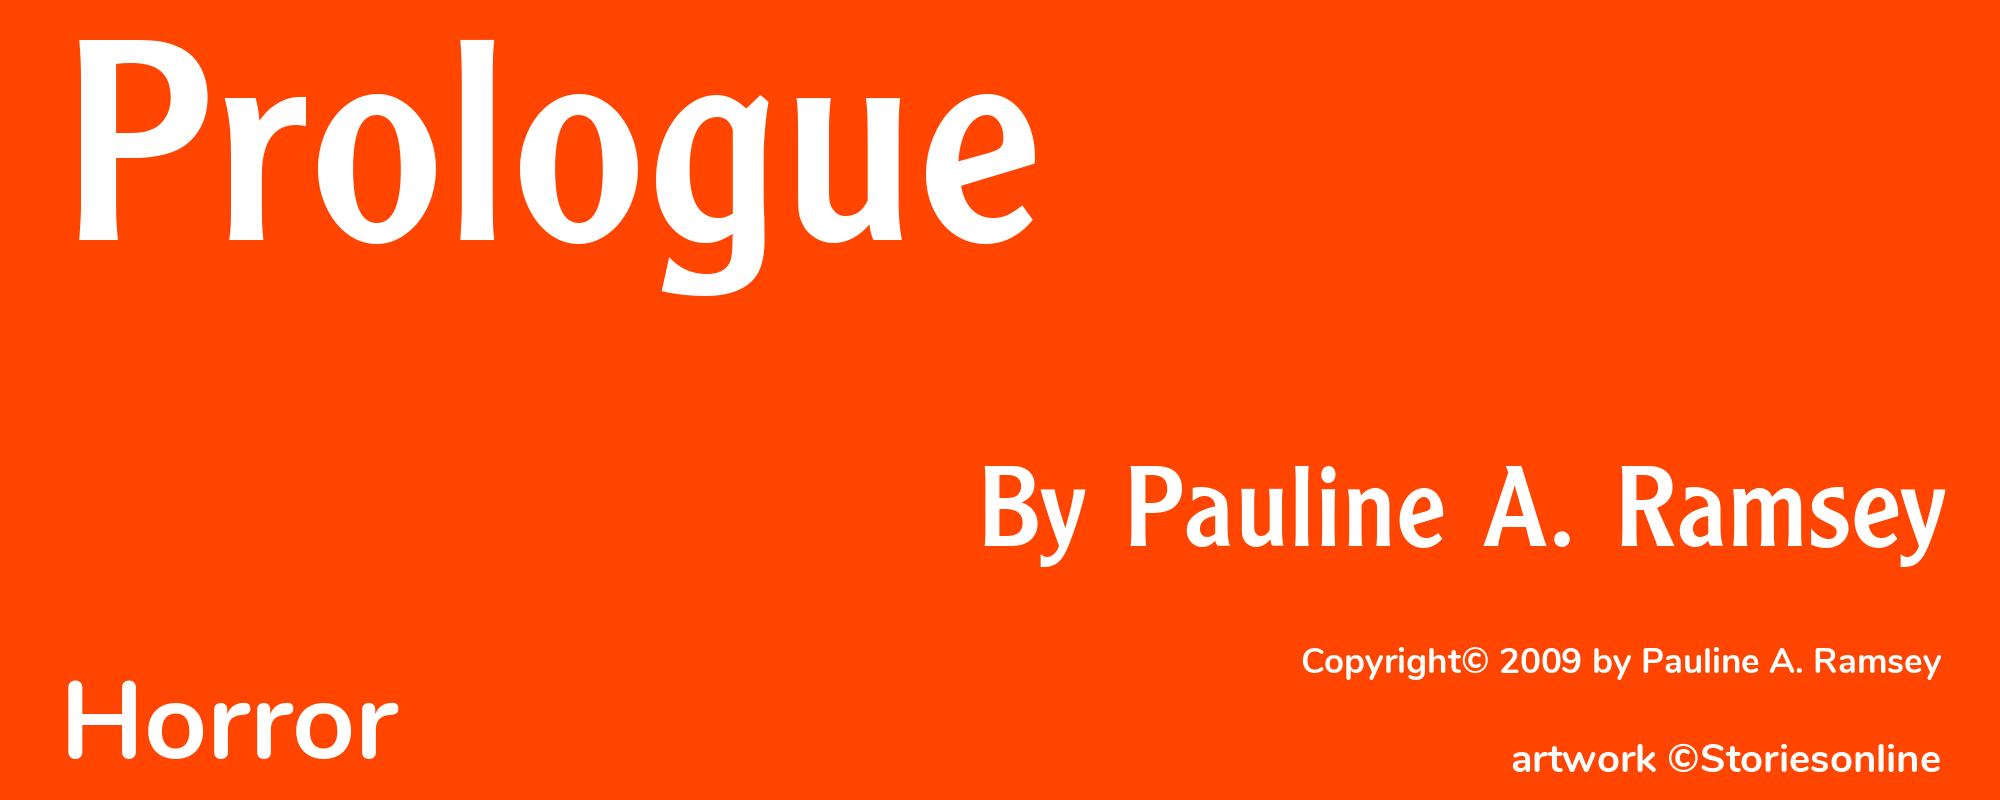 Prologue - Cover